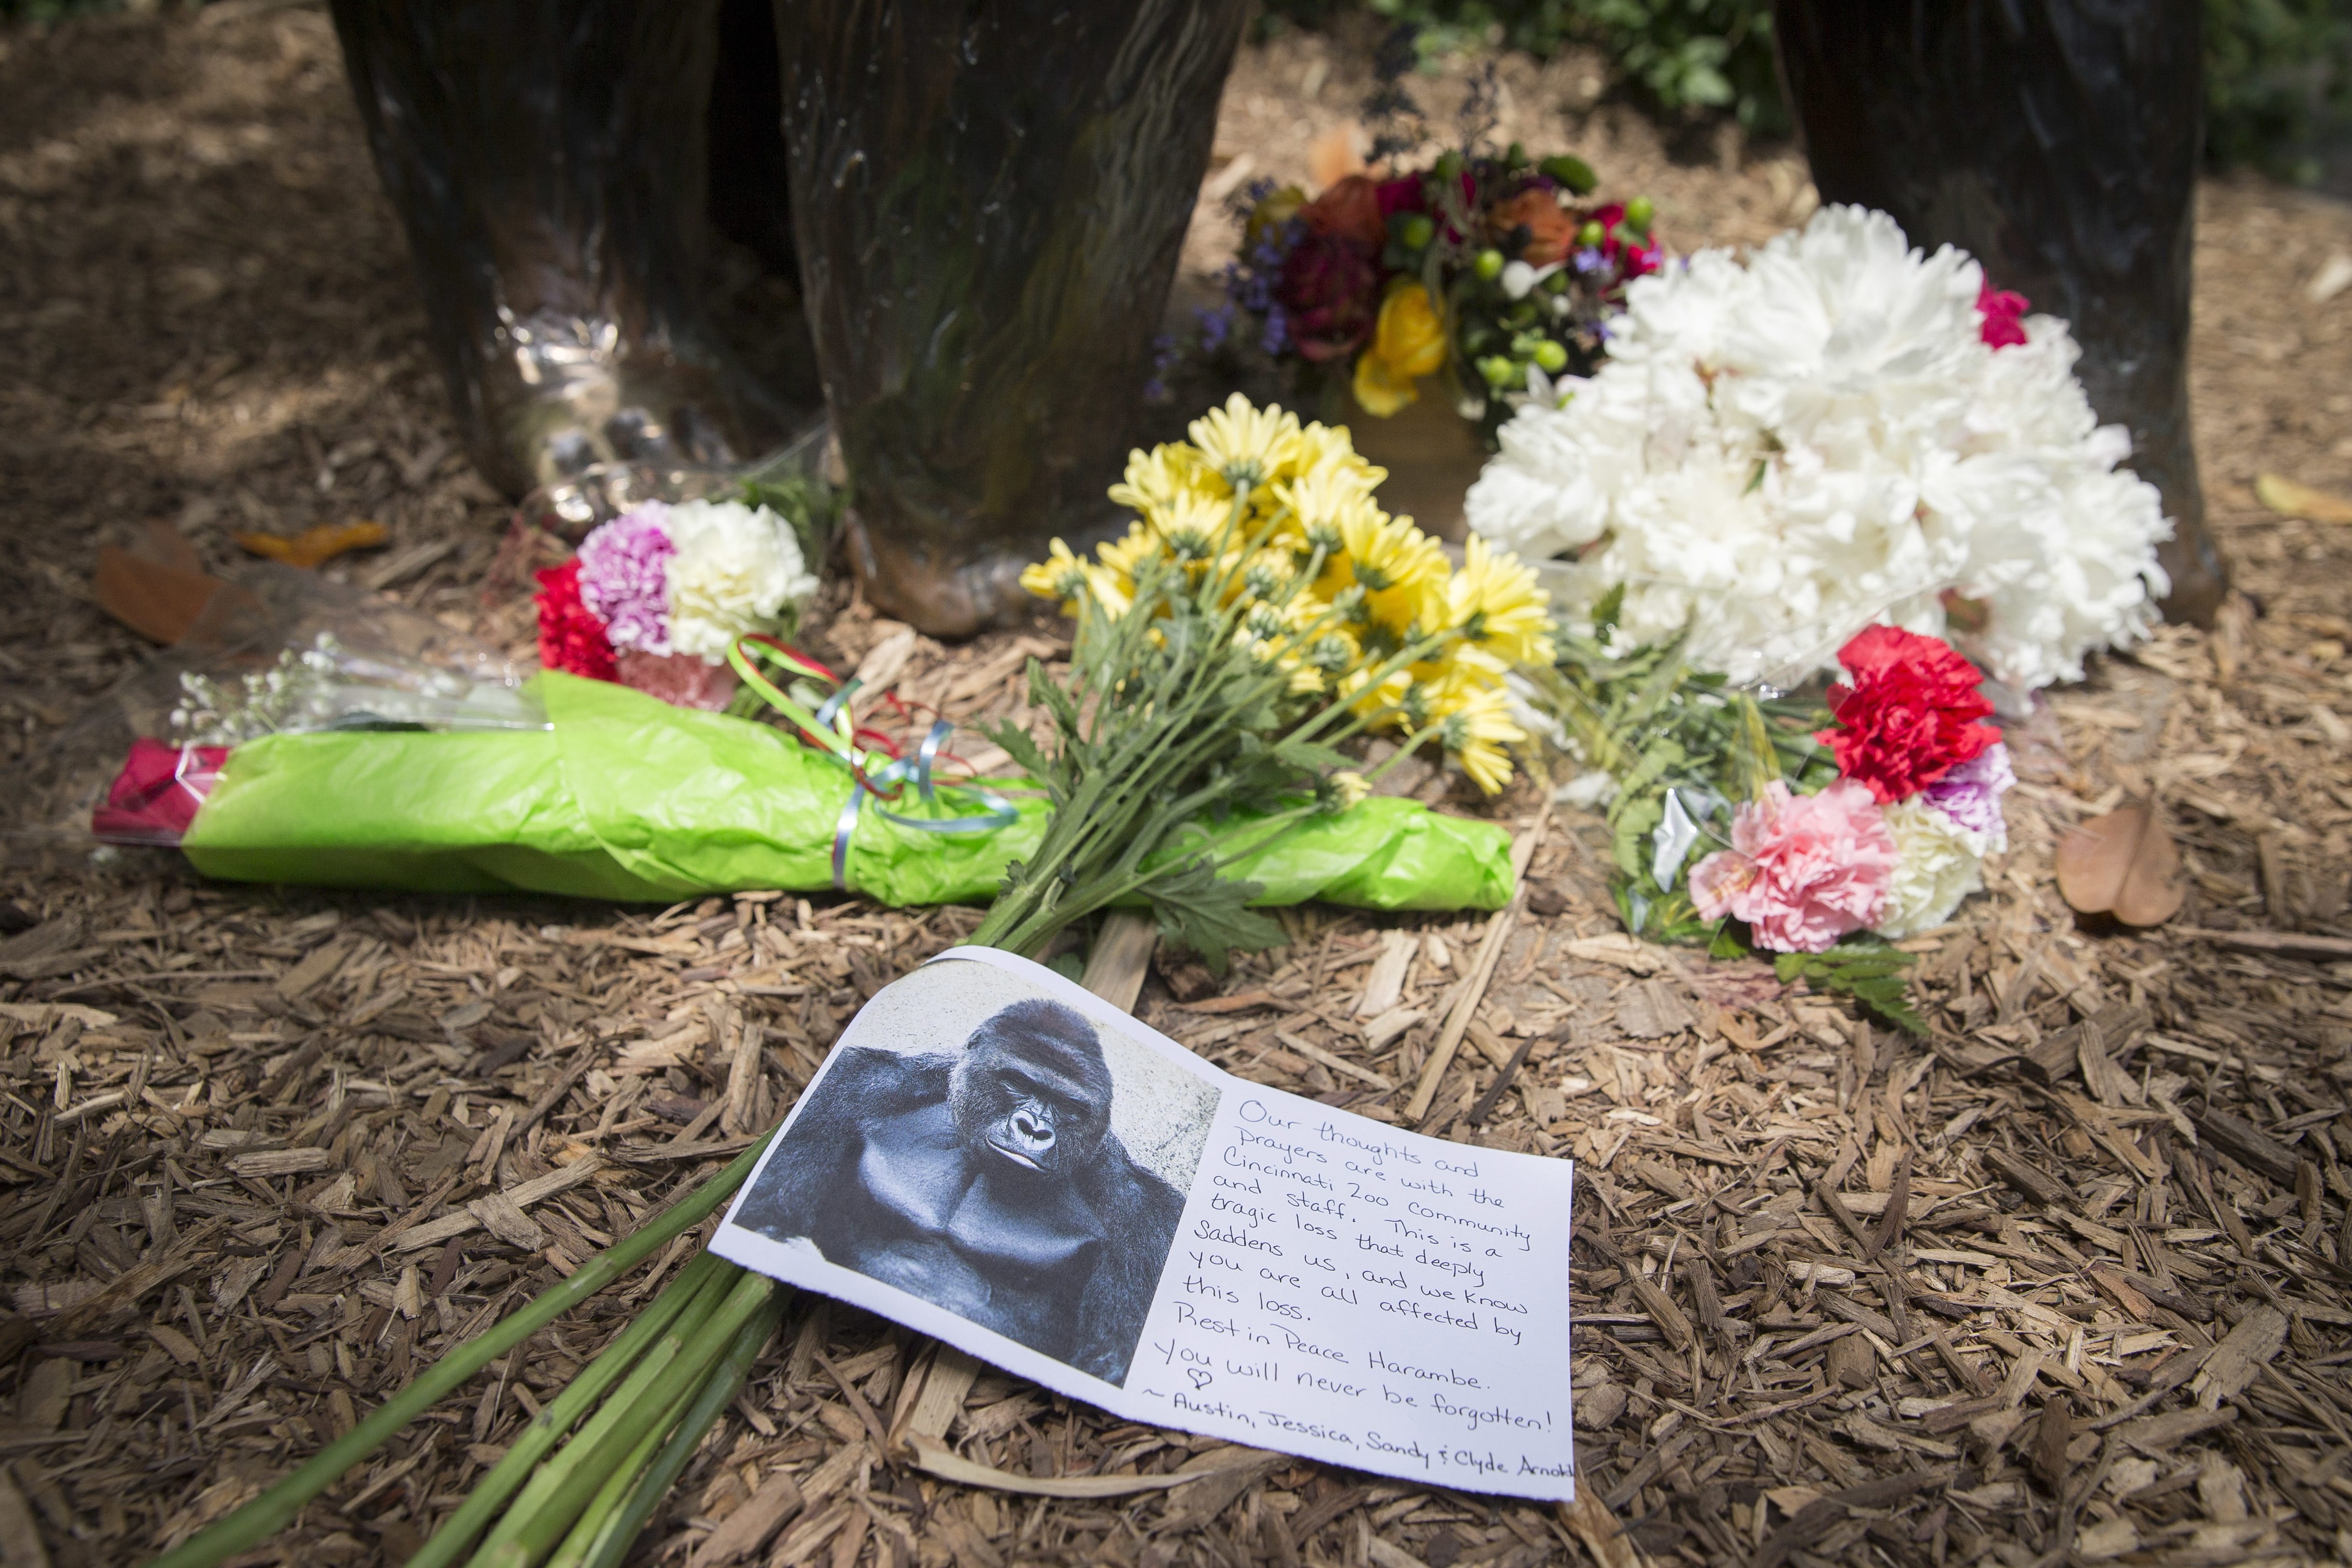 A sympathy card rests at the feet of a gorilla statue outside the Gorilla World exhibit at the Cincinnati Zoo &amp; Botanical Garden, Sunday, May 29, 2016, in Cincinnati. On Saturday, a special zoo response team shot and killed Harambe, a 17-year-old gorilla, that grabbed and dragged a 4-year-old boy who fell into the gorilla exhibit moat. Authorities said the boy is expected to recover. He was taken to Cincinnati Children's Hospital Medical Center.